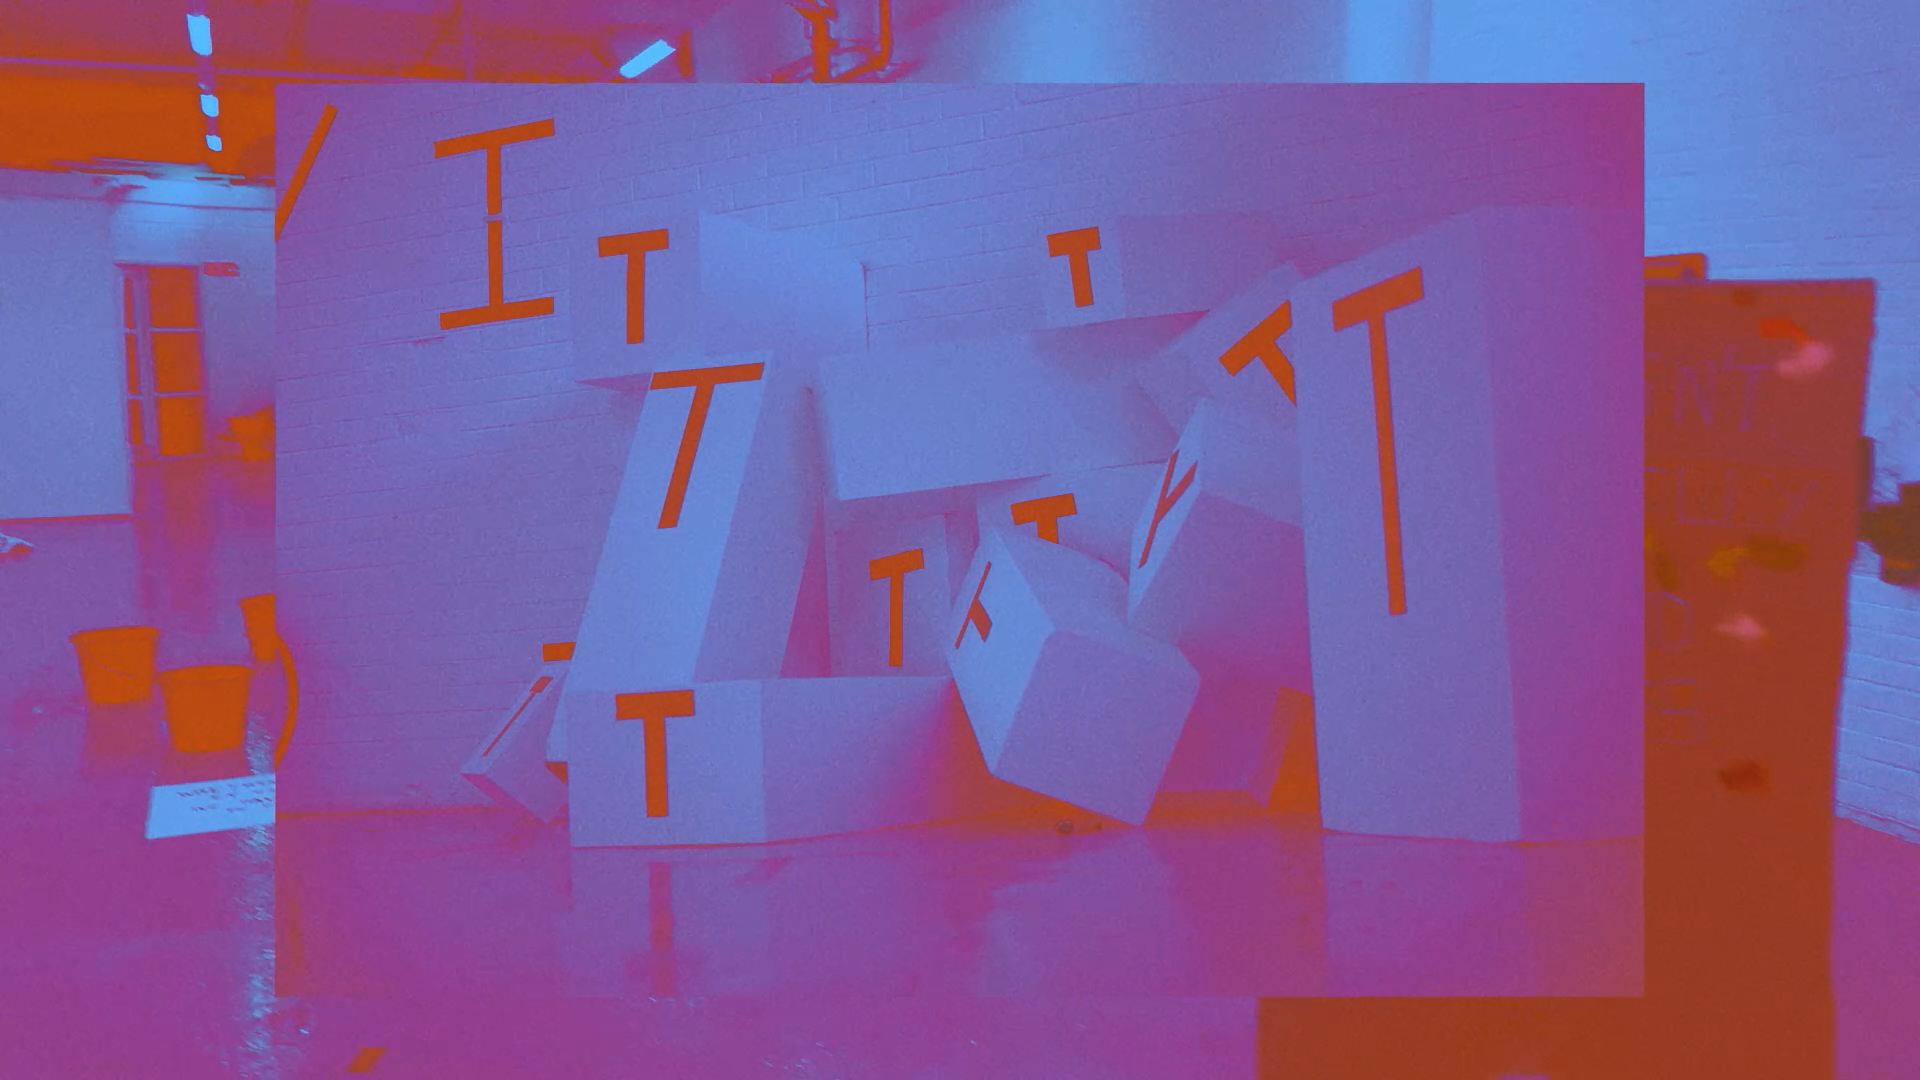 A purple and red tinted image made of layered photographs, with the top photograph depicting a pile of square blocks printed with the letter t